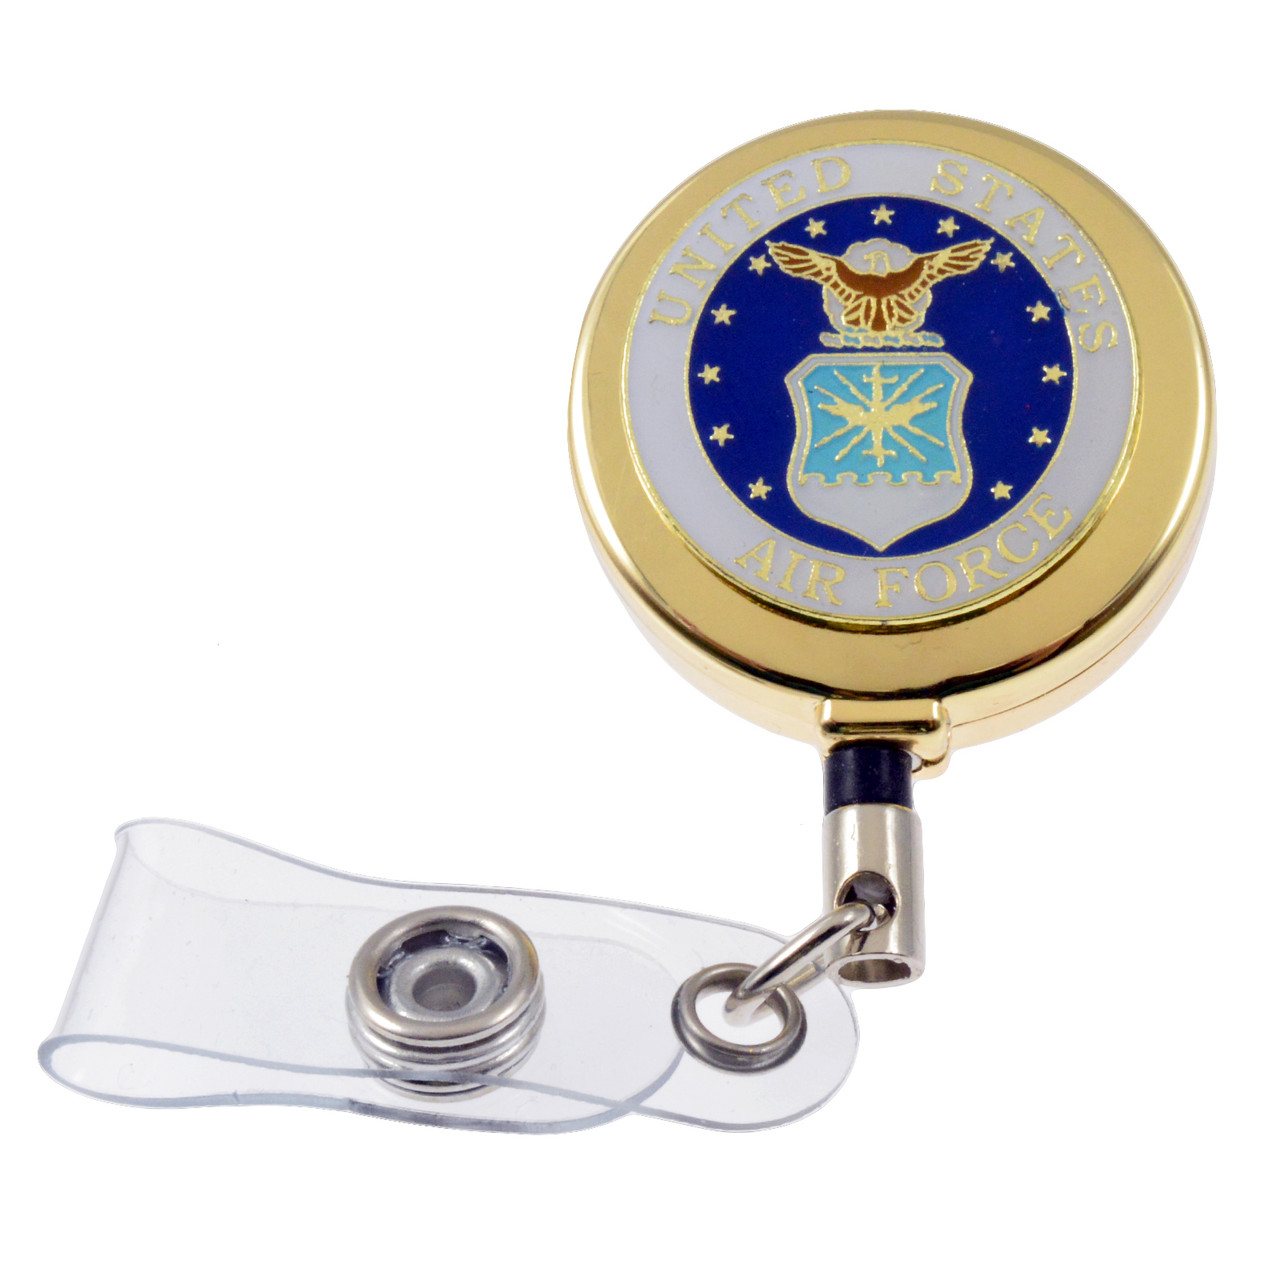 https://cdn11.bigcommerce.com/s-tqsou4yk2f/images/stencil/1280x1280/products/977/6526/air-force-seal-gold-badge-reel__50086__30335.1626465318.jpg?c=1